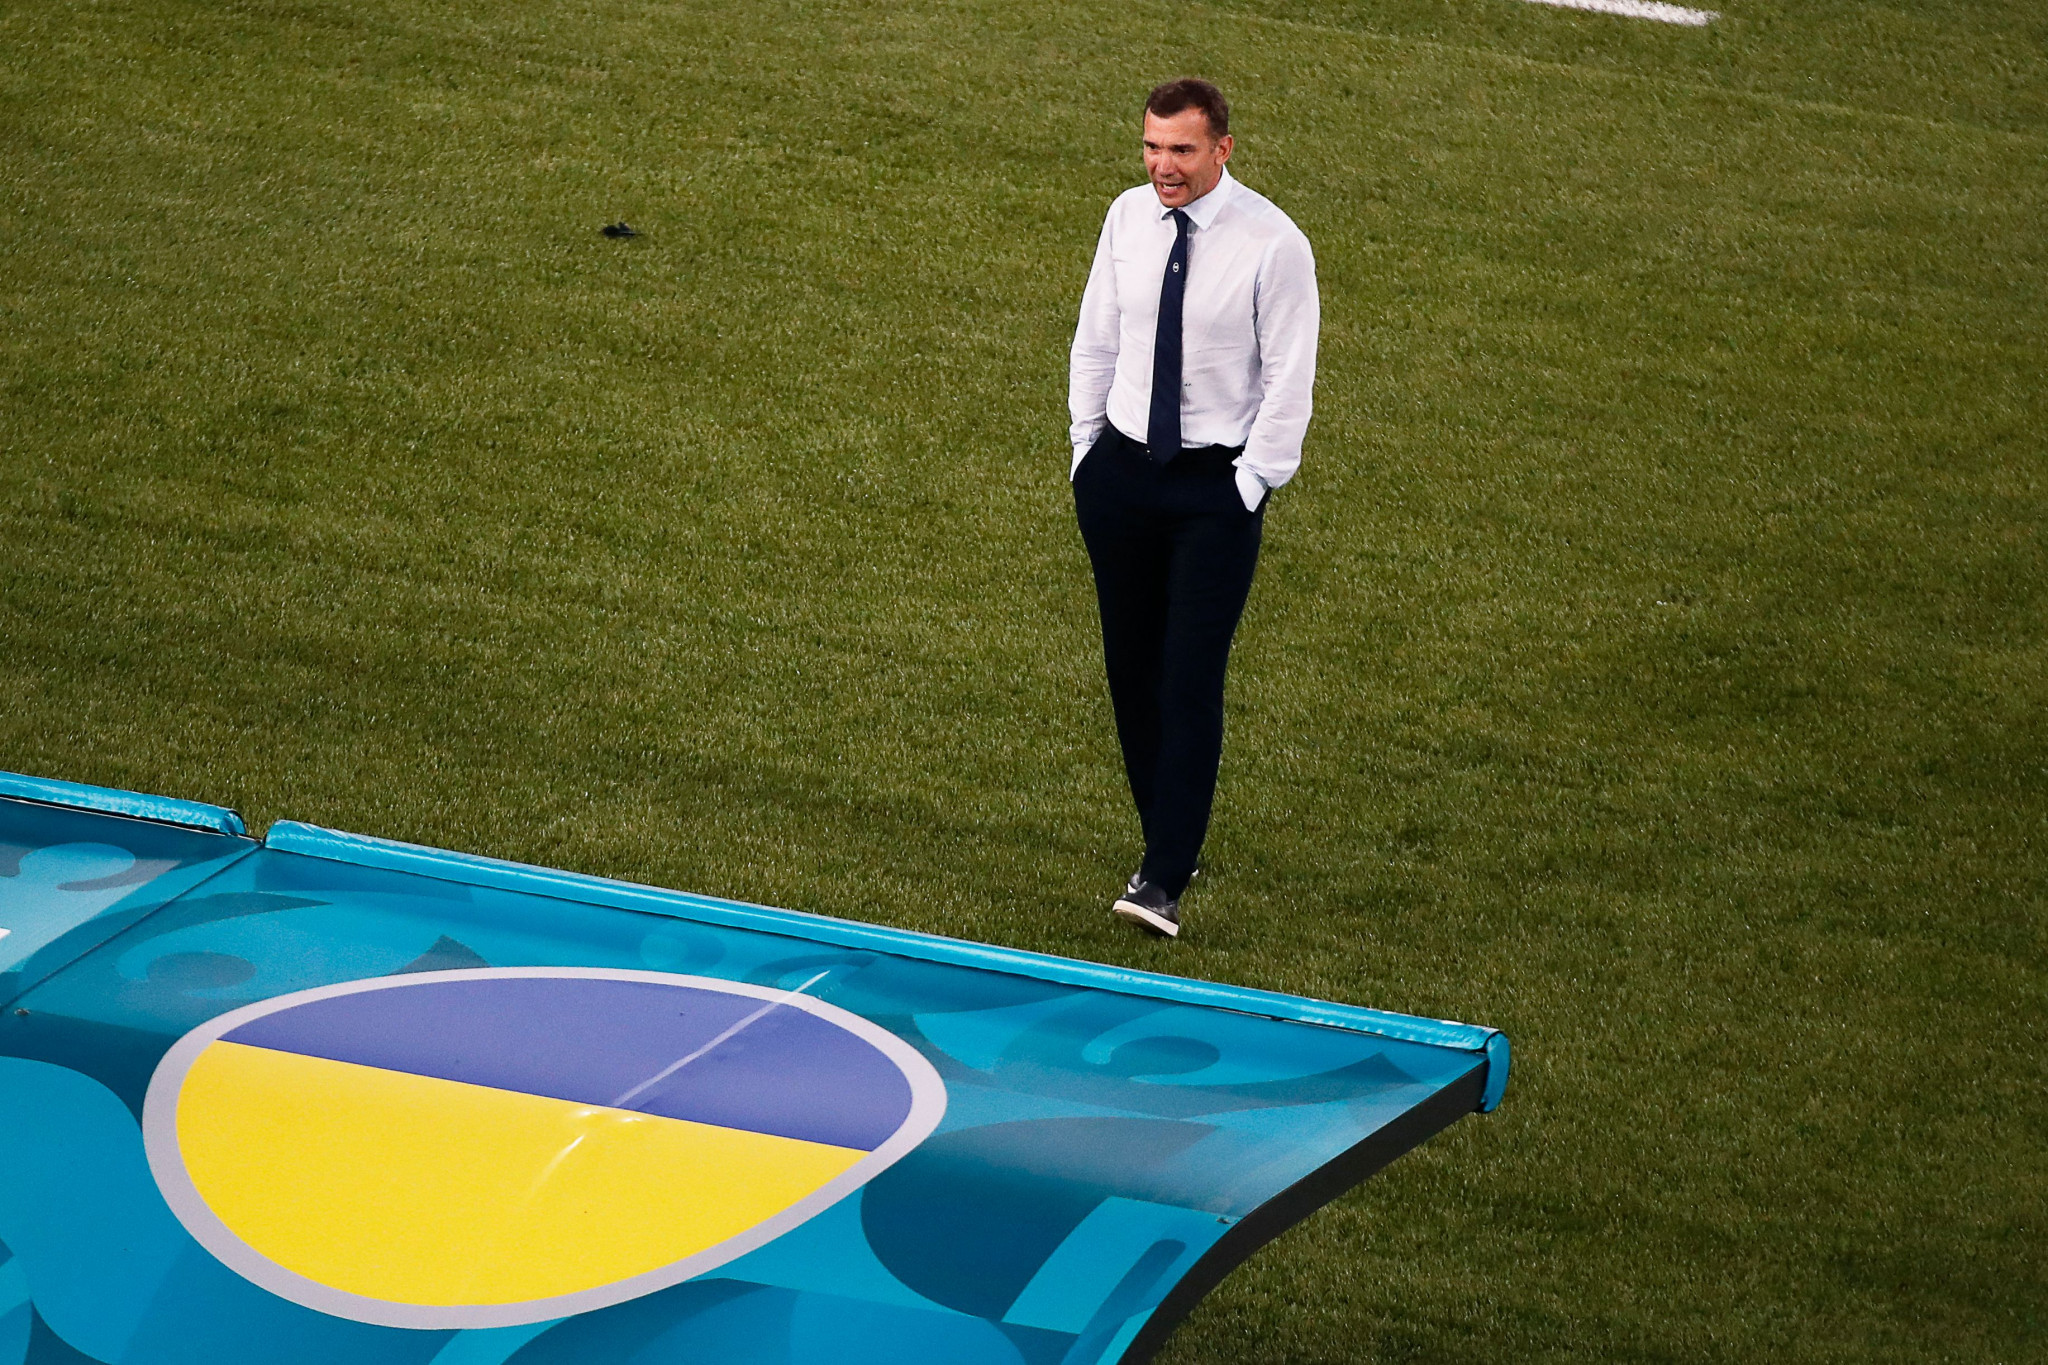 Andriy Shevchenko is Ukraine's record goalscorer and last year led the nation to the quarter-finals at Euro 2020 as a coach ©Getty Images